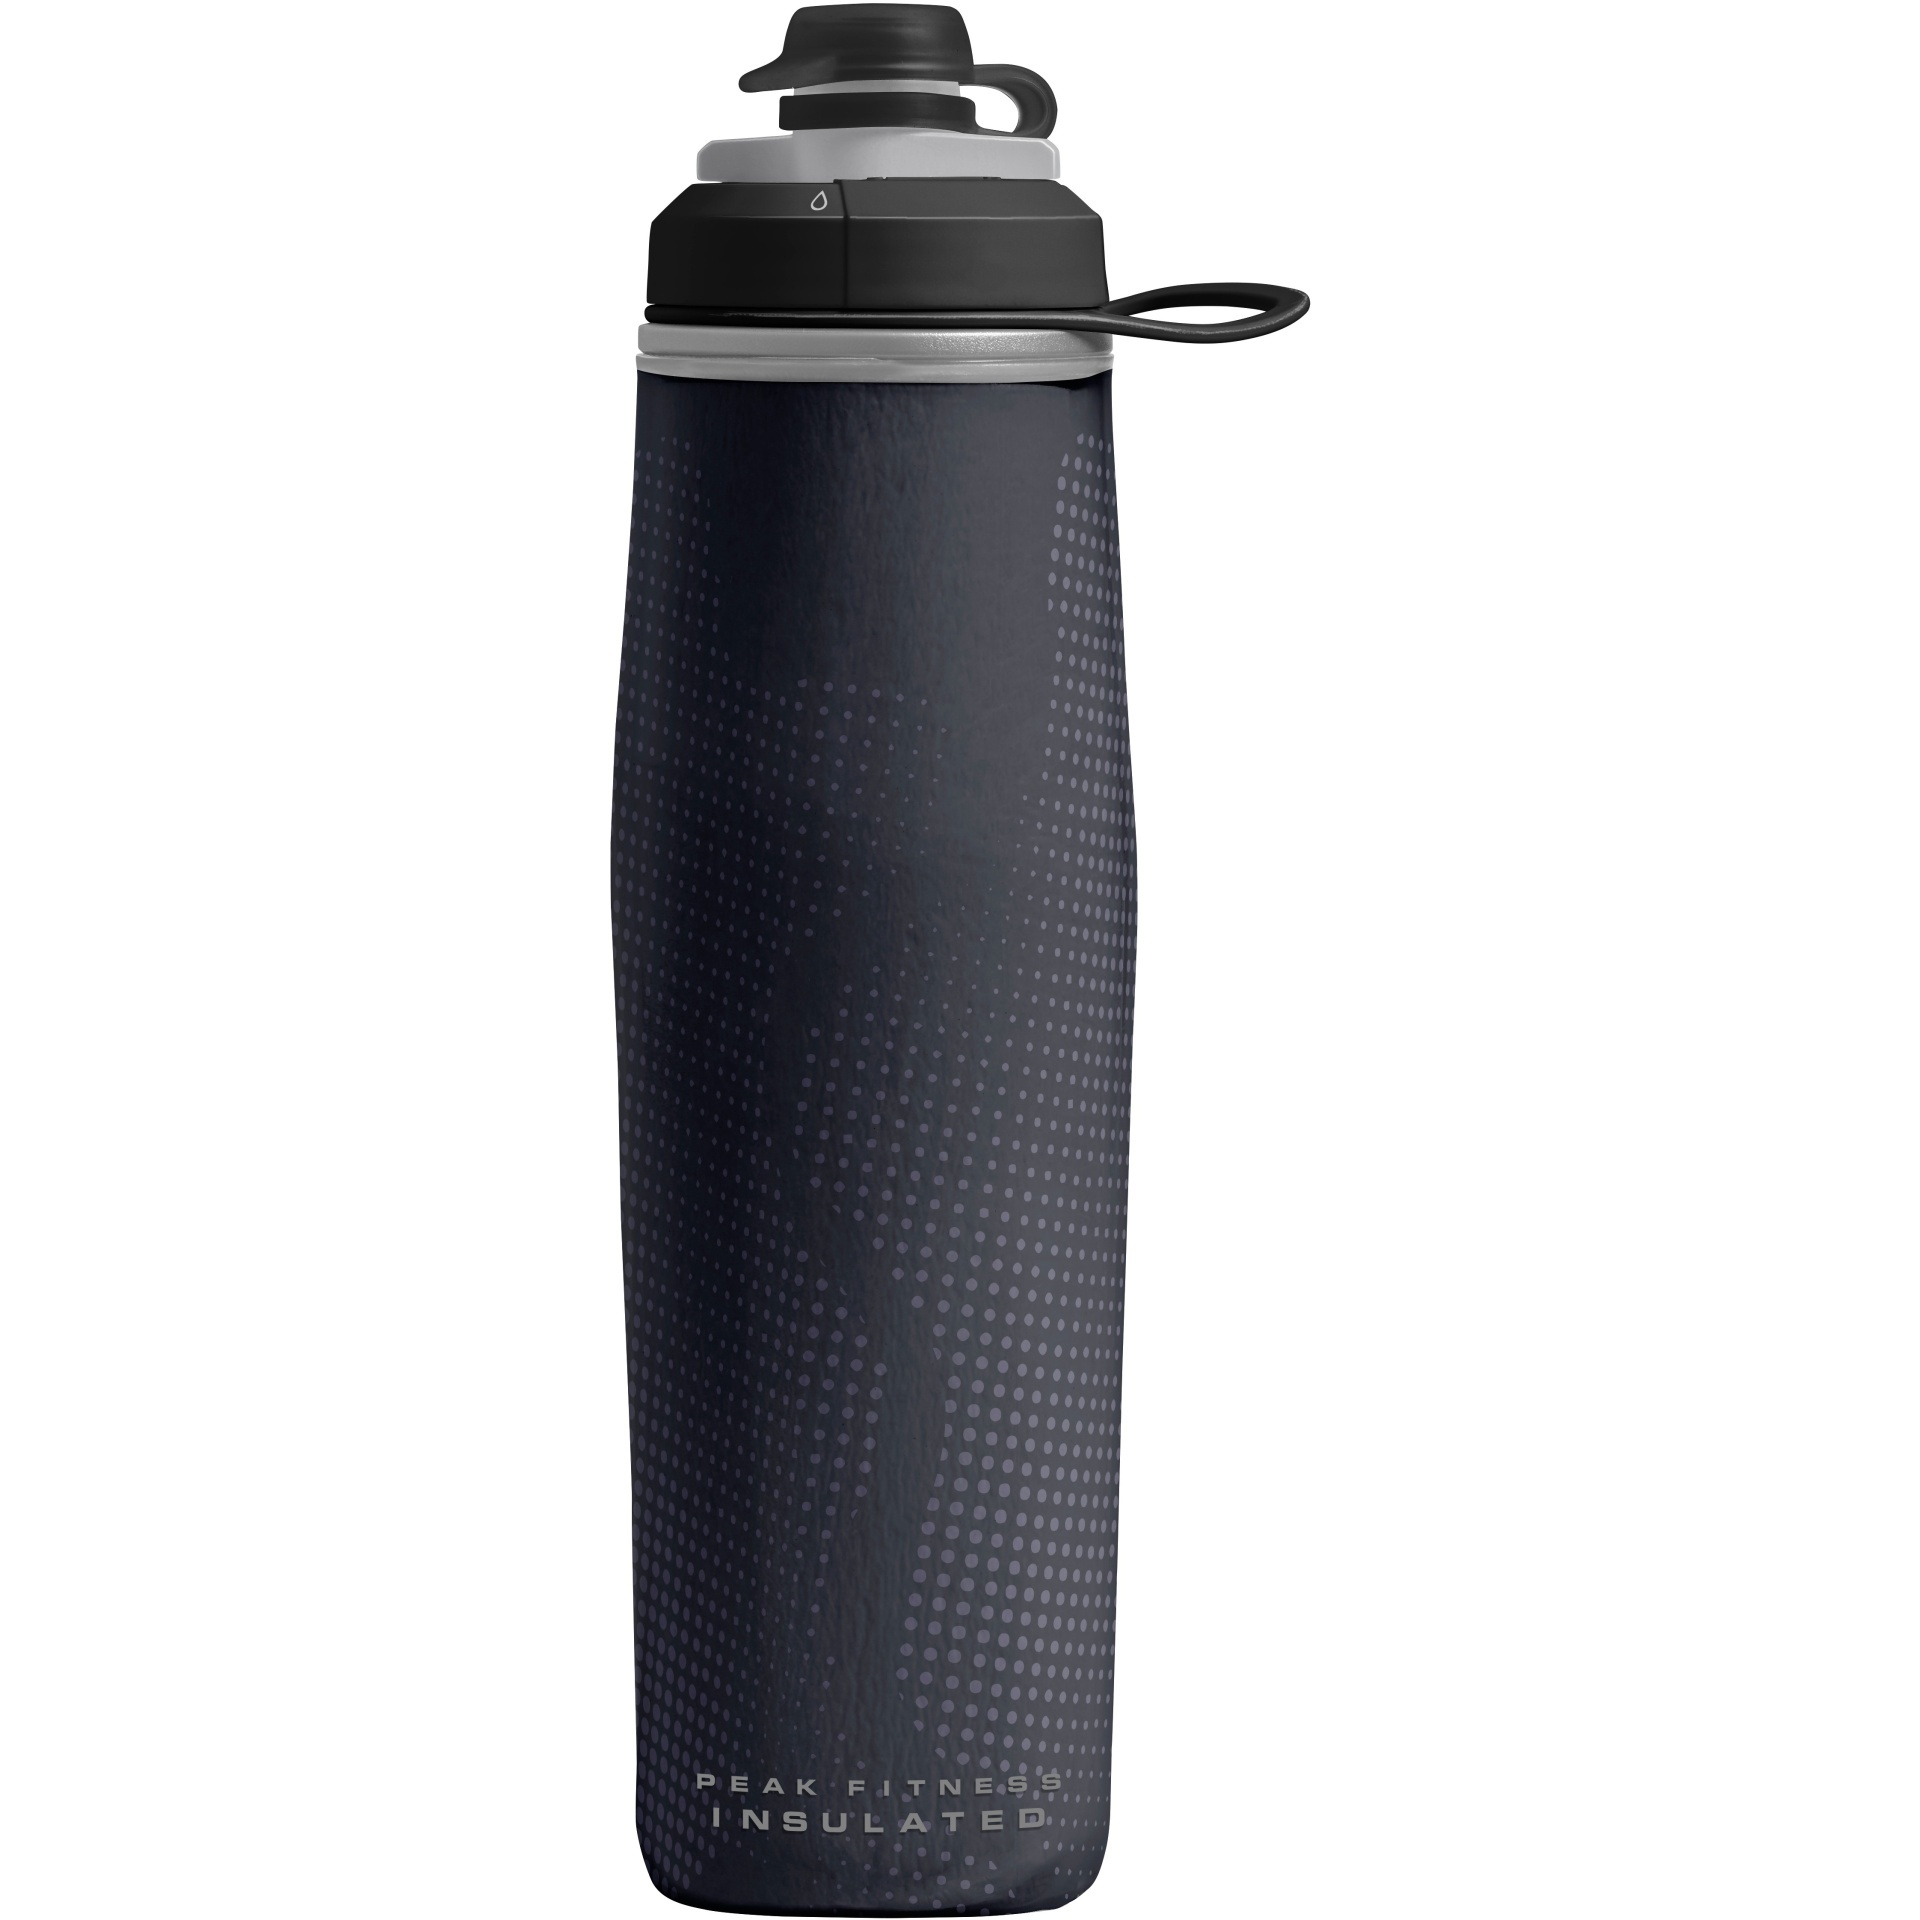 slide 1 of 1, CamelBak Peak Fitness Chill Insulated Squeeze Water Bottle - Black/Silver, 25 oz